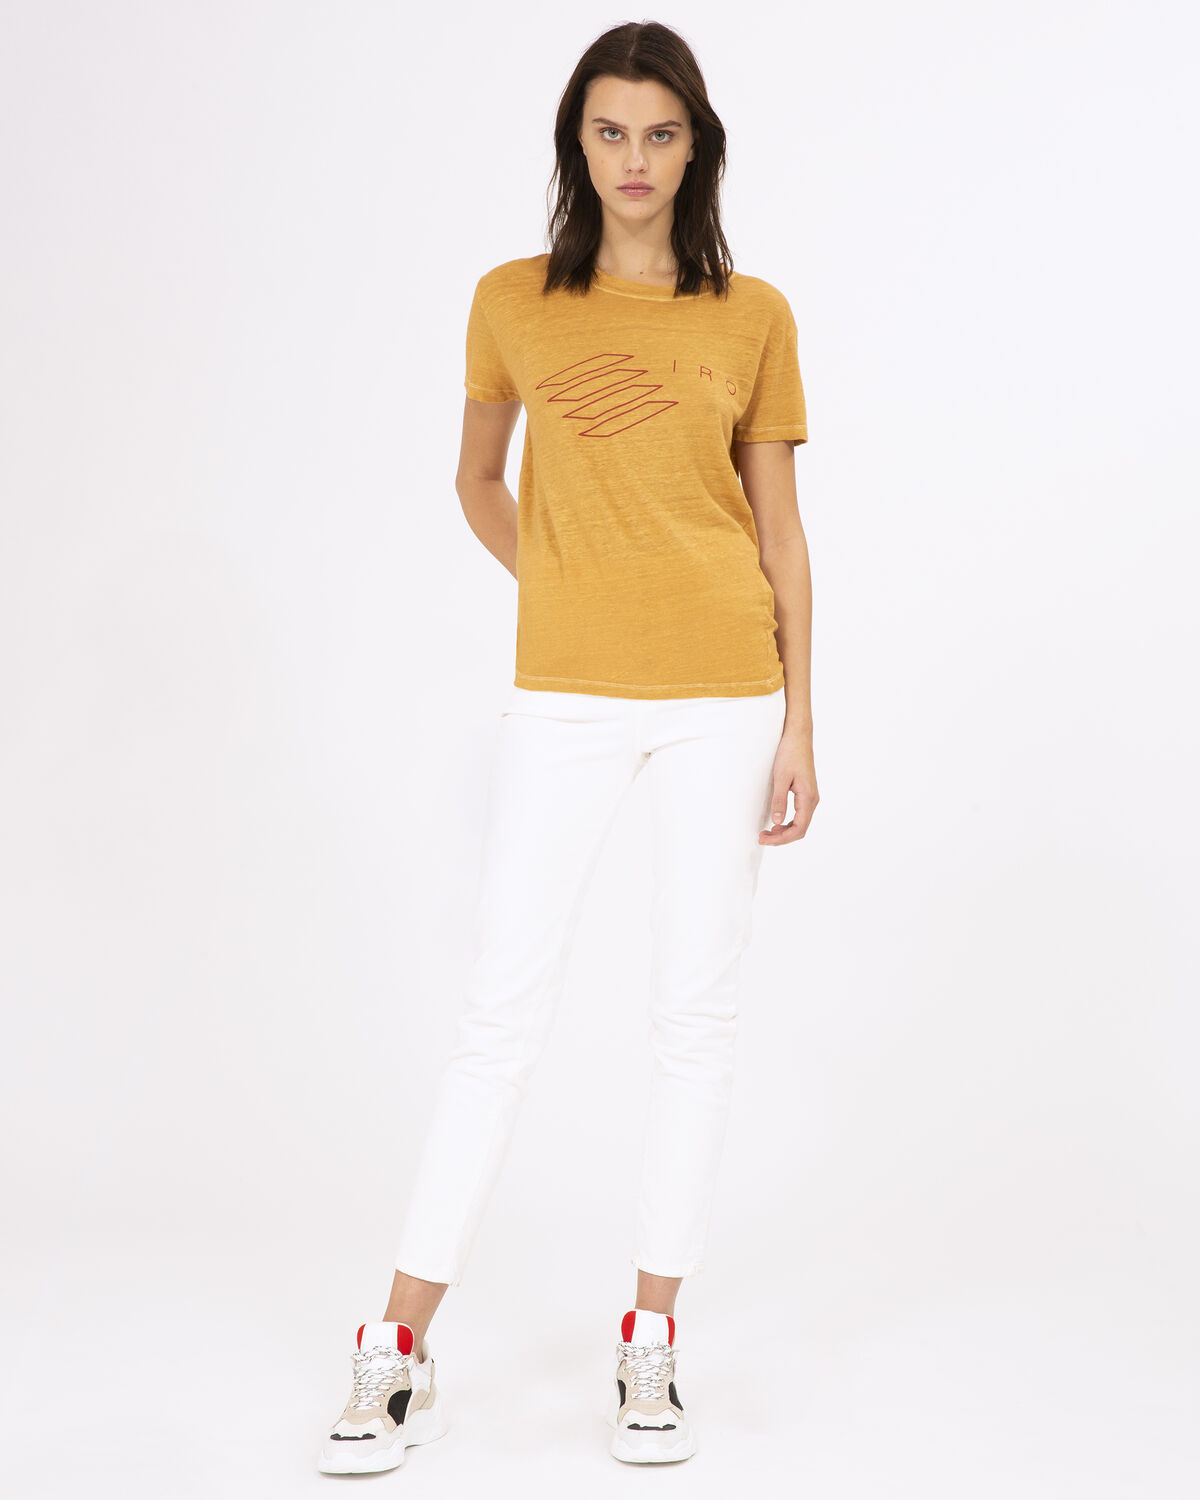 Photo of IRO Paris Lucie T-Shirt Safran - This Season, Iro Revisits Its Timeless Linen T-shirt And Offers A Resolutely Modern Silkscreened Version. With Its Graphic Logo, This Top Will Perfectly Match Jeans And A Pair Of Dad Shoes For A Casual Silhouette. Spring Summer 19